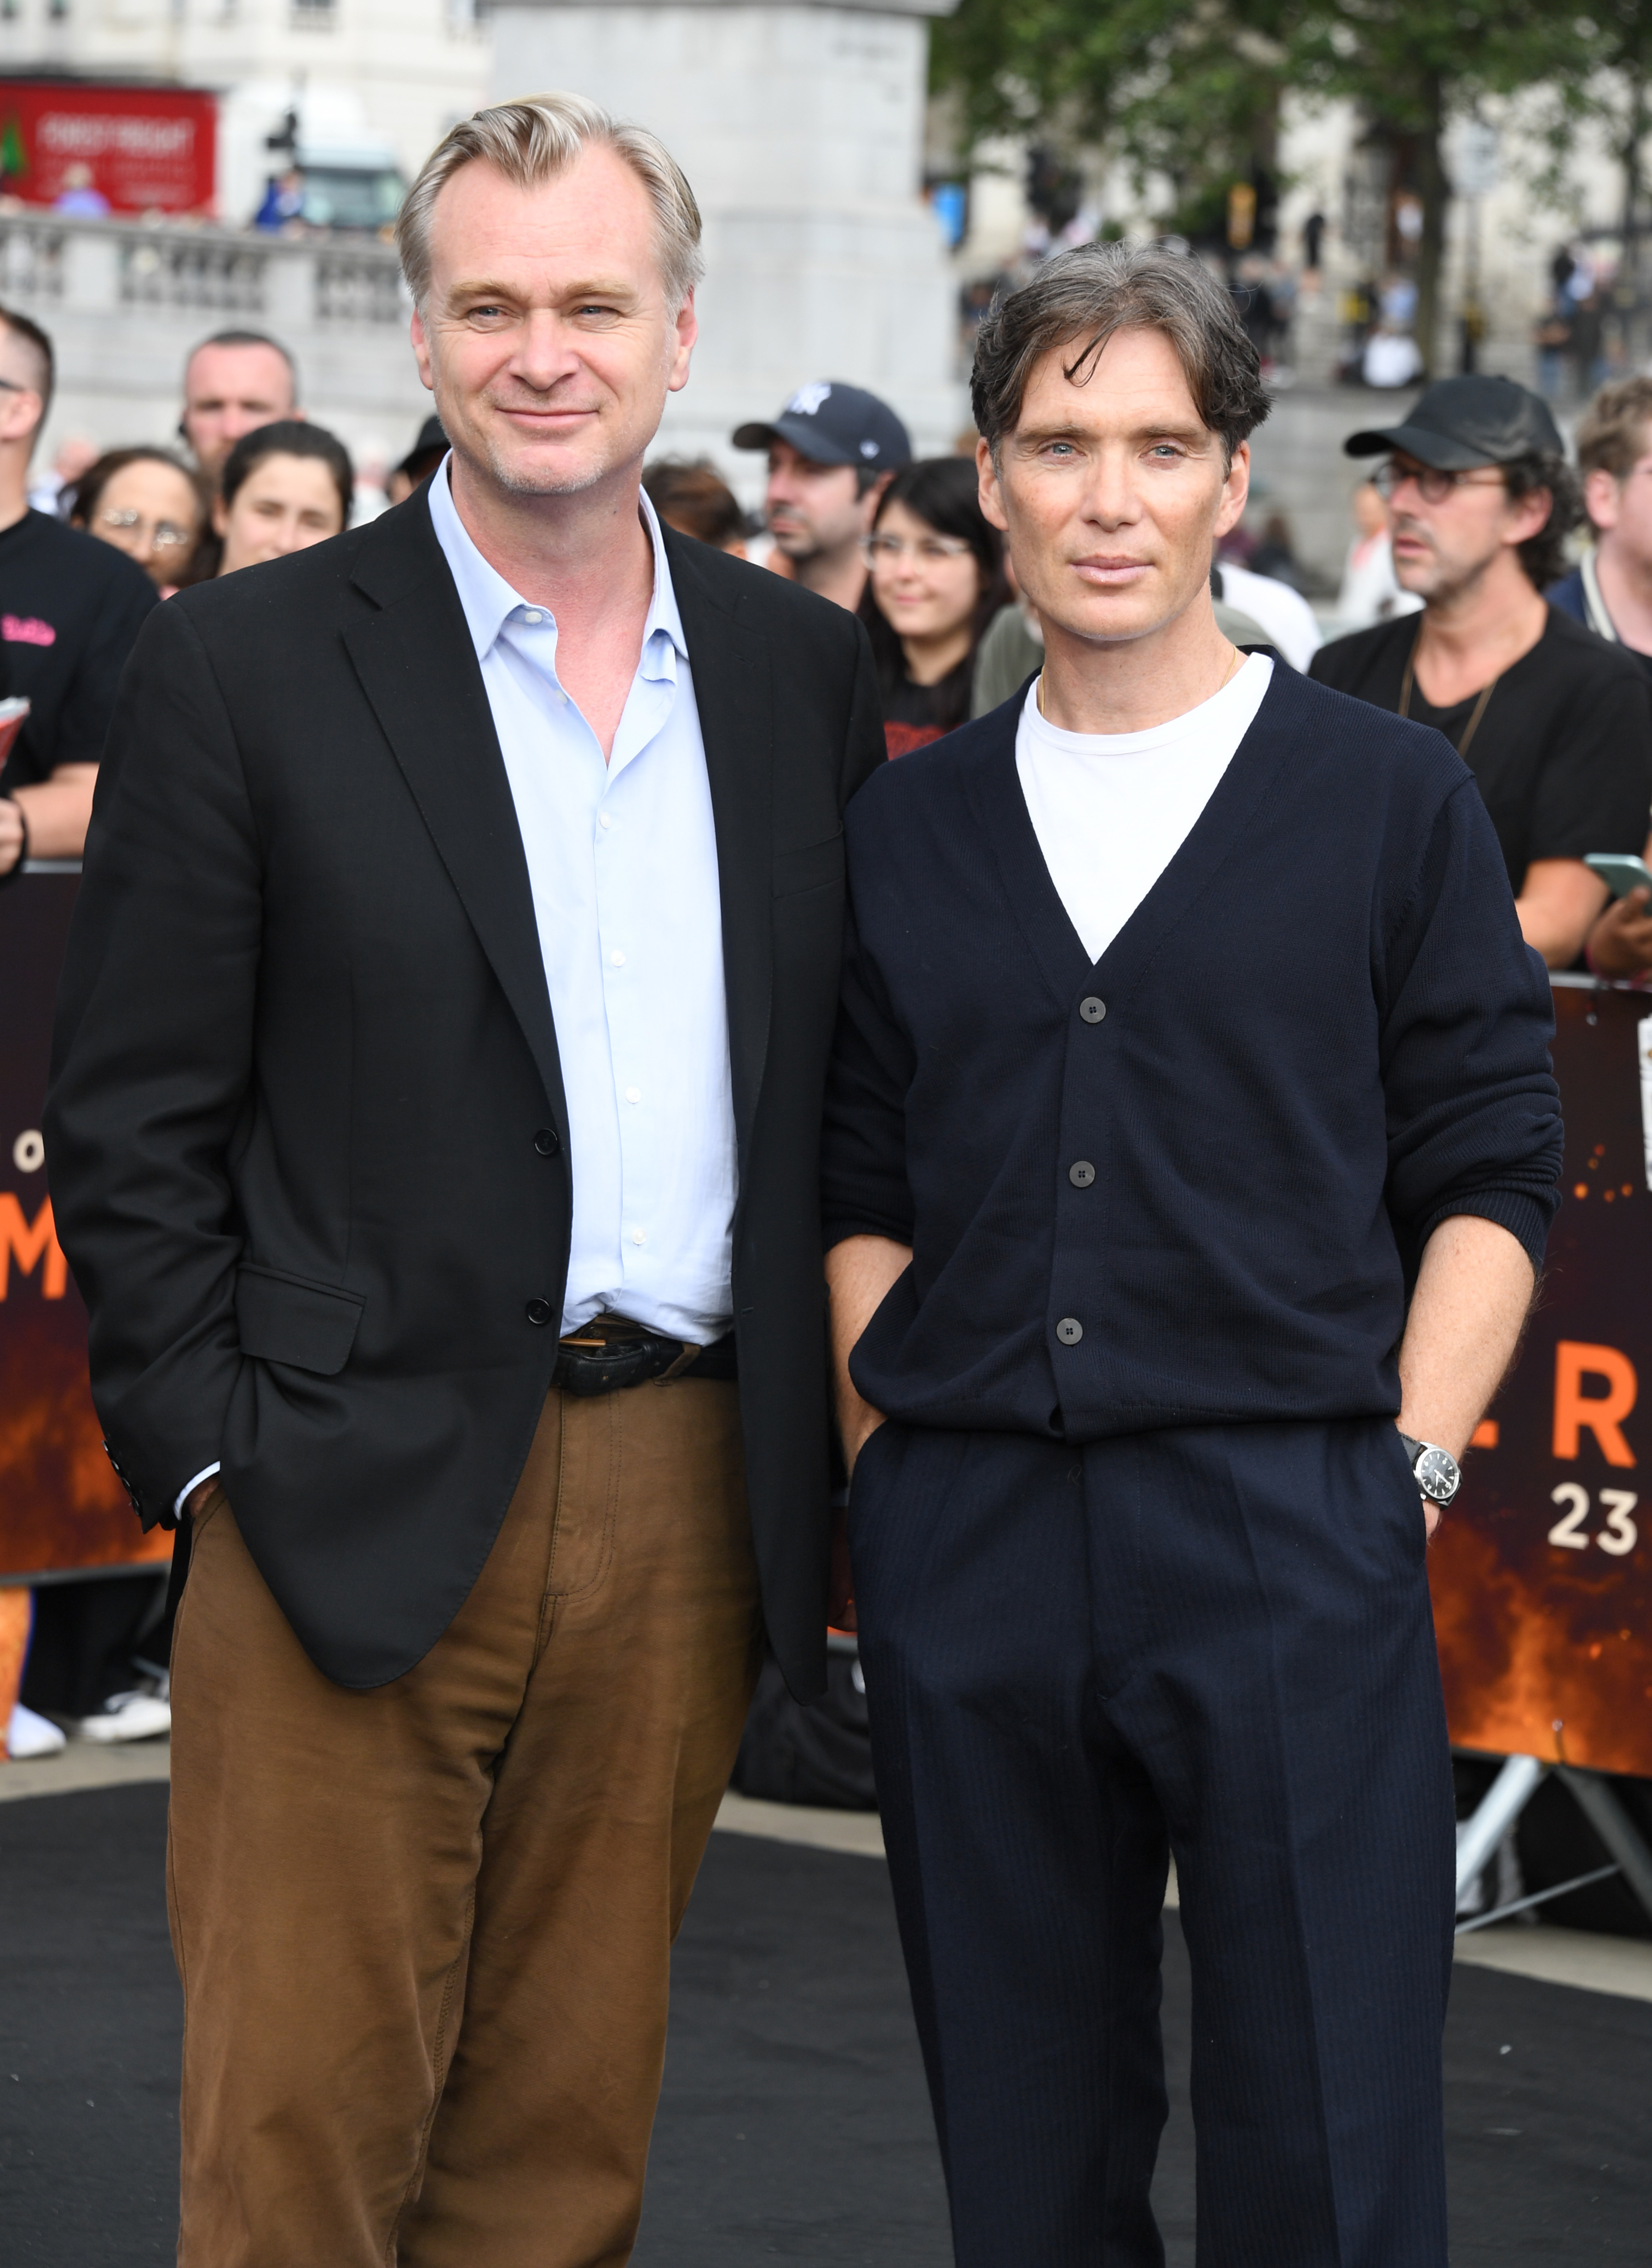 Close-up of Christopher and Cillian at a media event